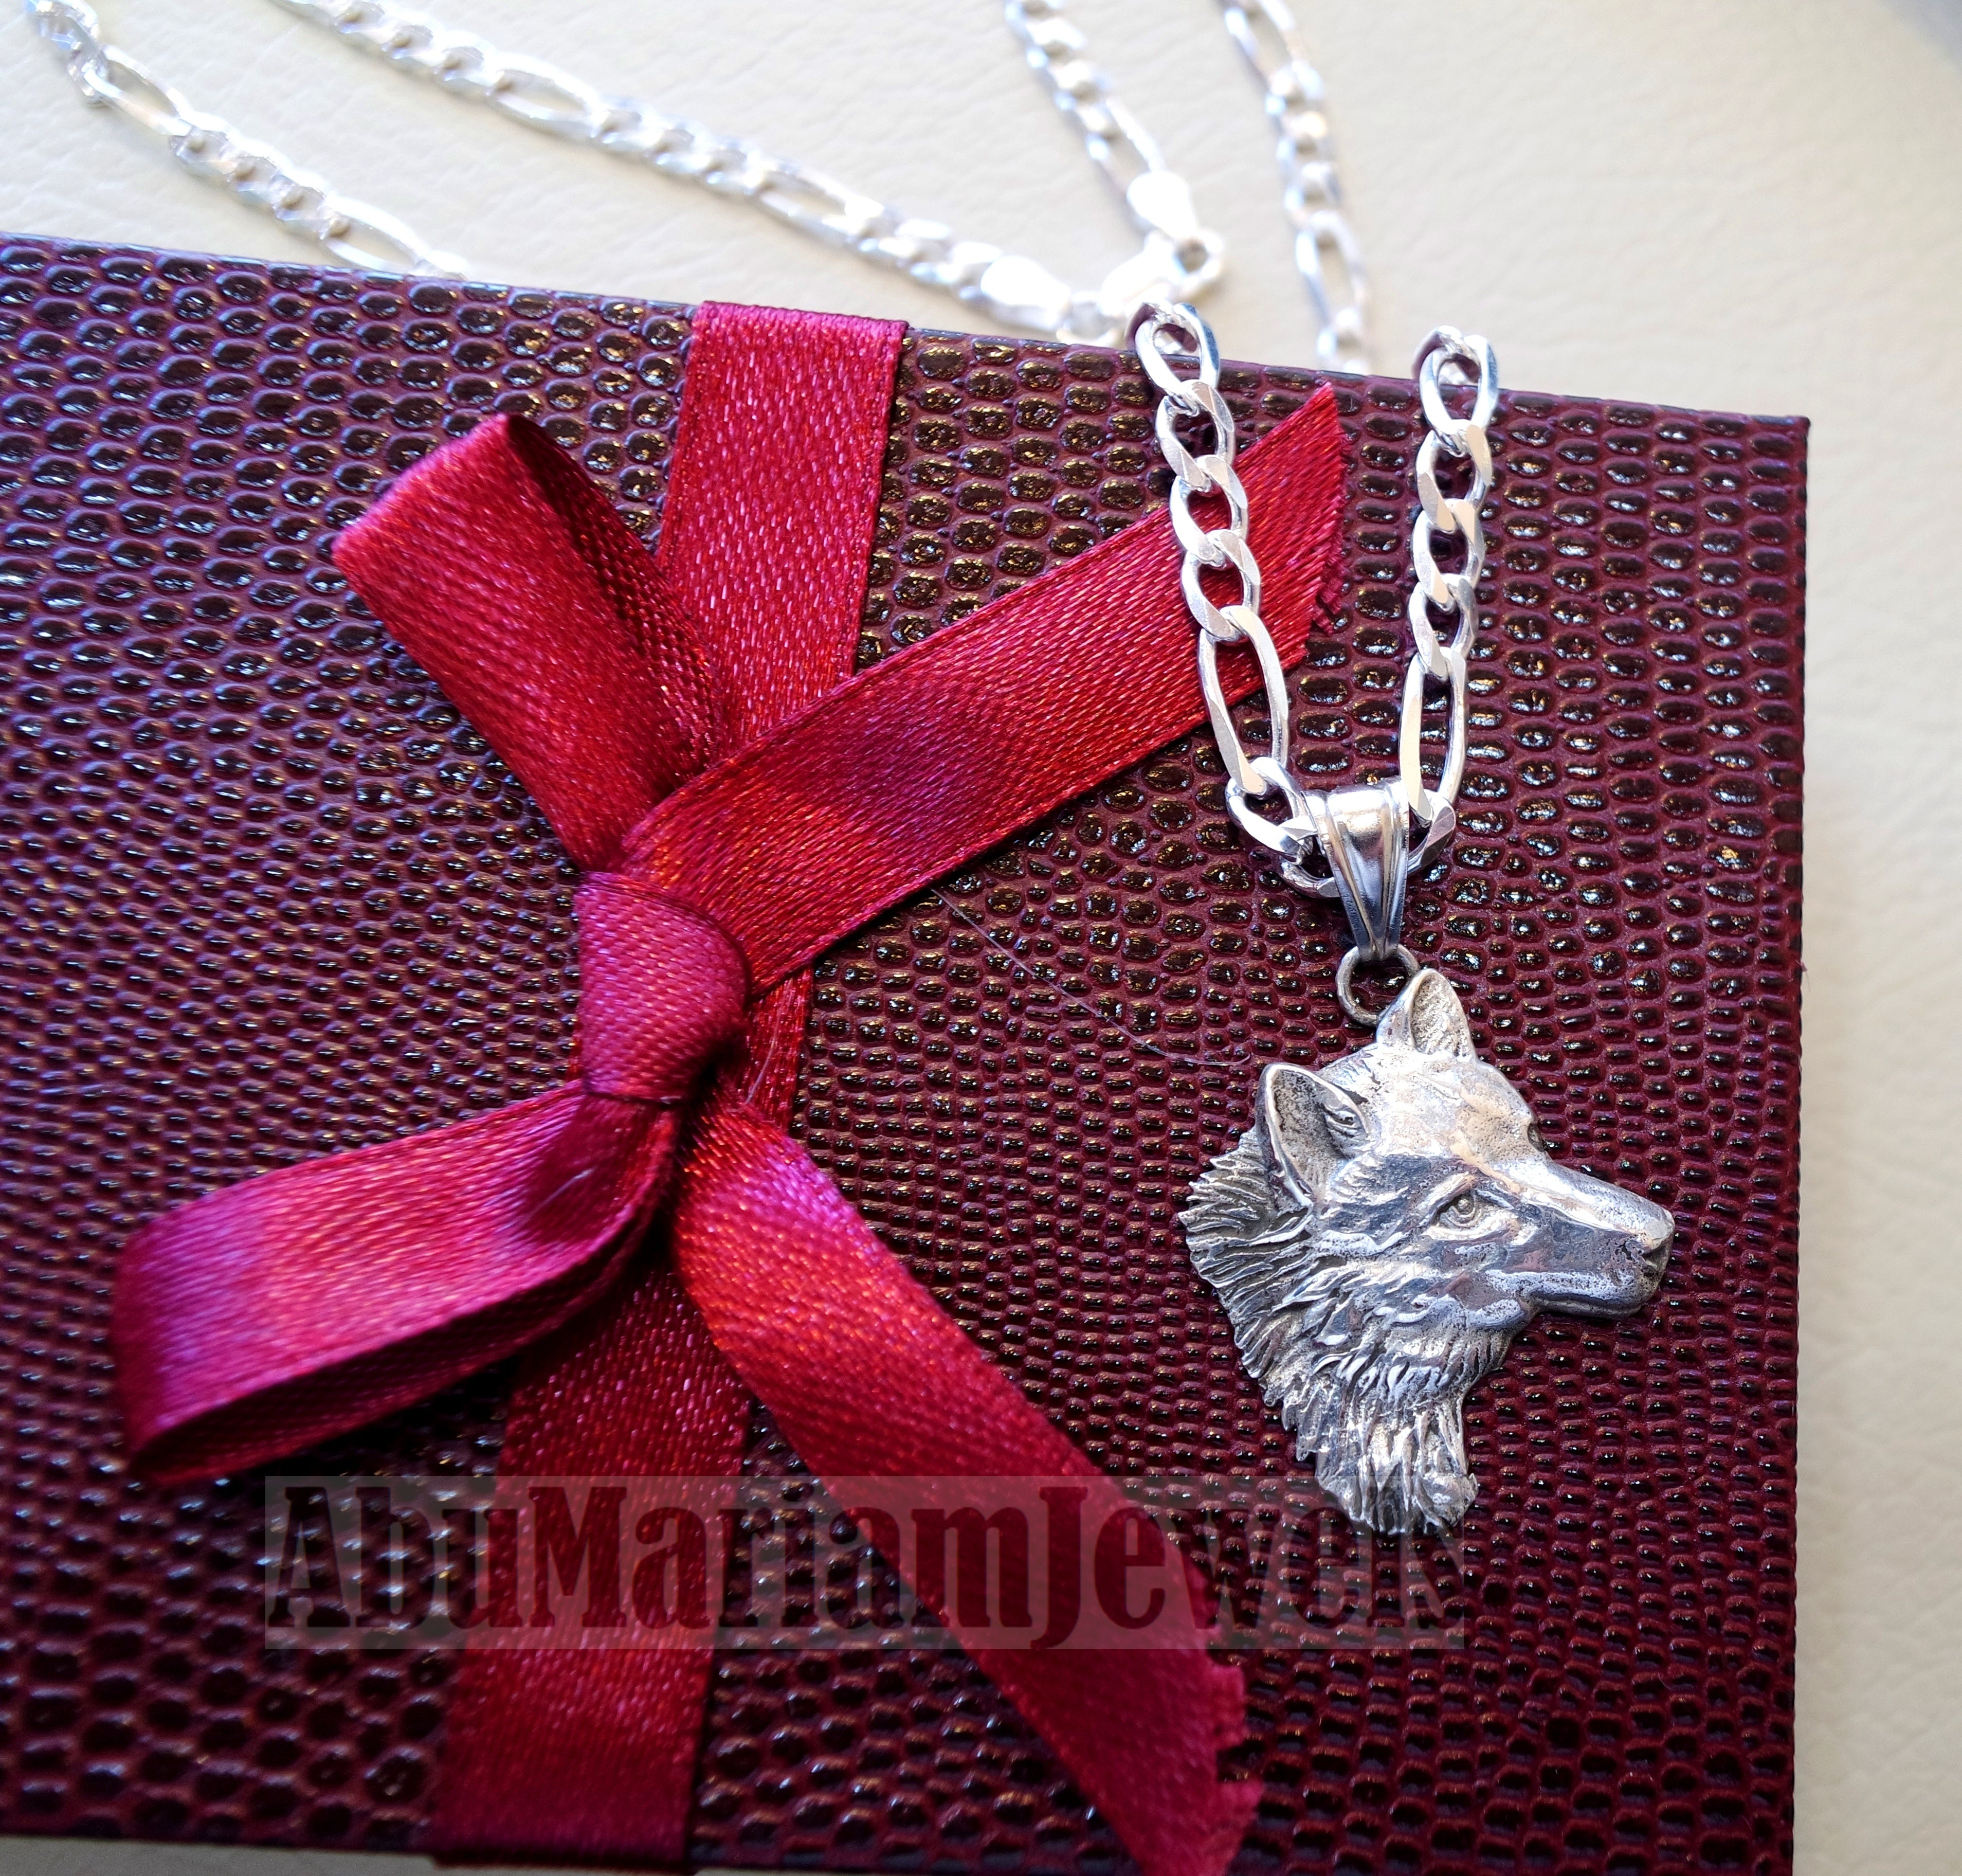 wolf , Husky dog sterling silver 925 pendant with thick figaro chain handmade animal head jewelry fast shipping detailed craftsmanship